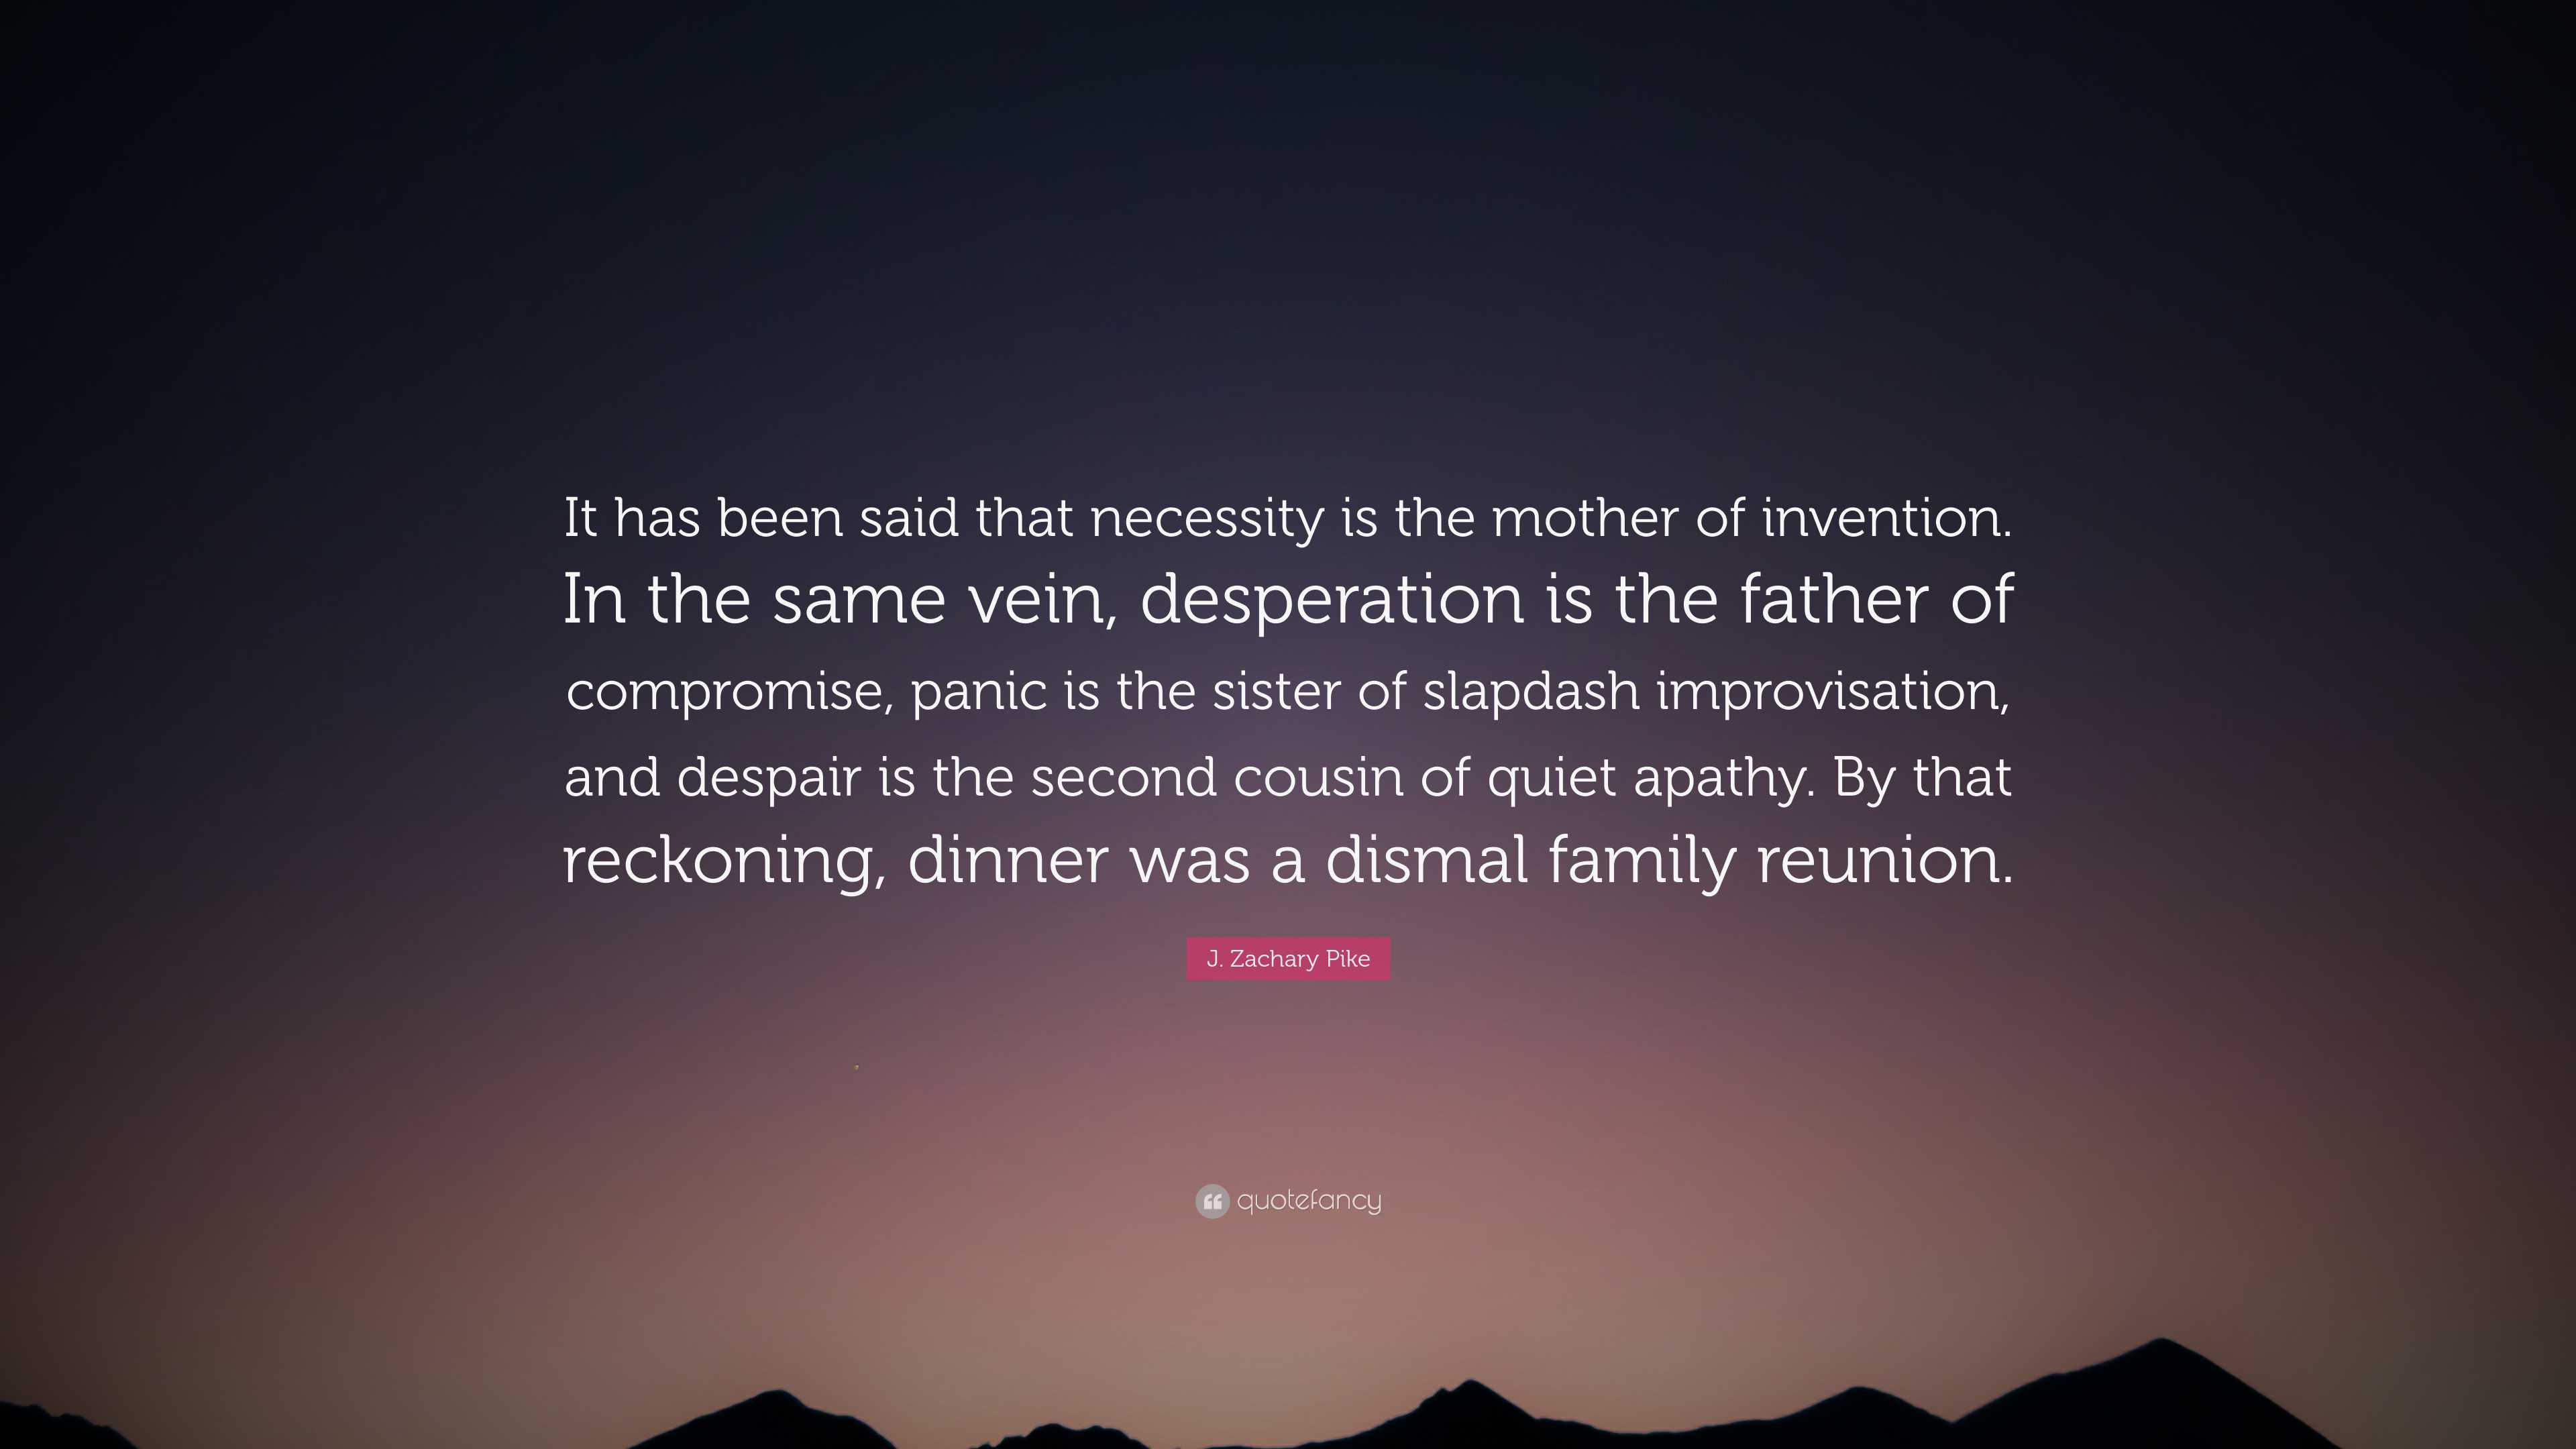 J. Zachary Pike Quote: “It has been said that necessity is the mother of  invention. In the same vein, desperation is the father of compromise, p”